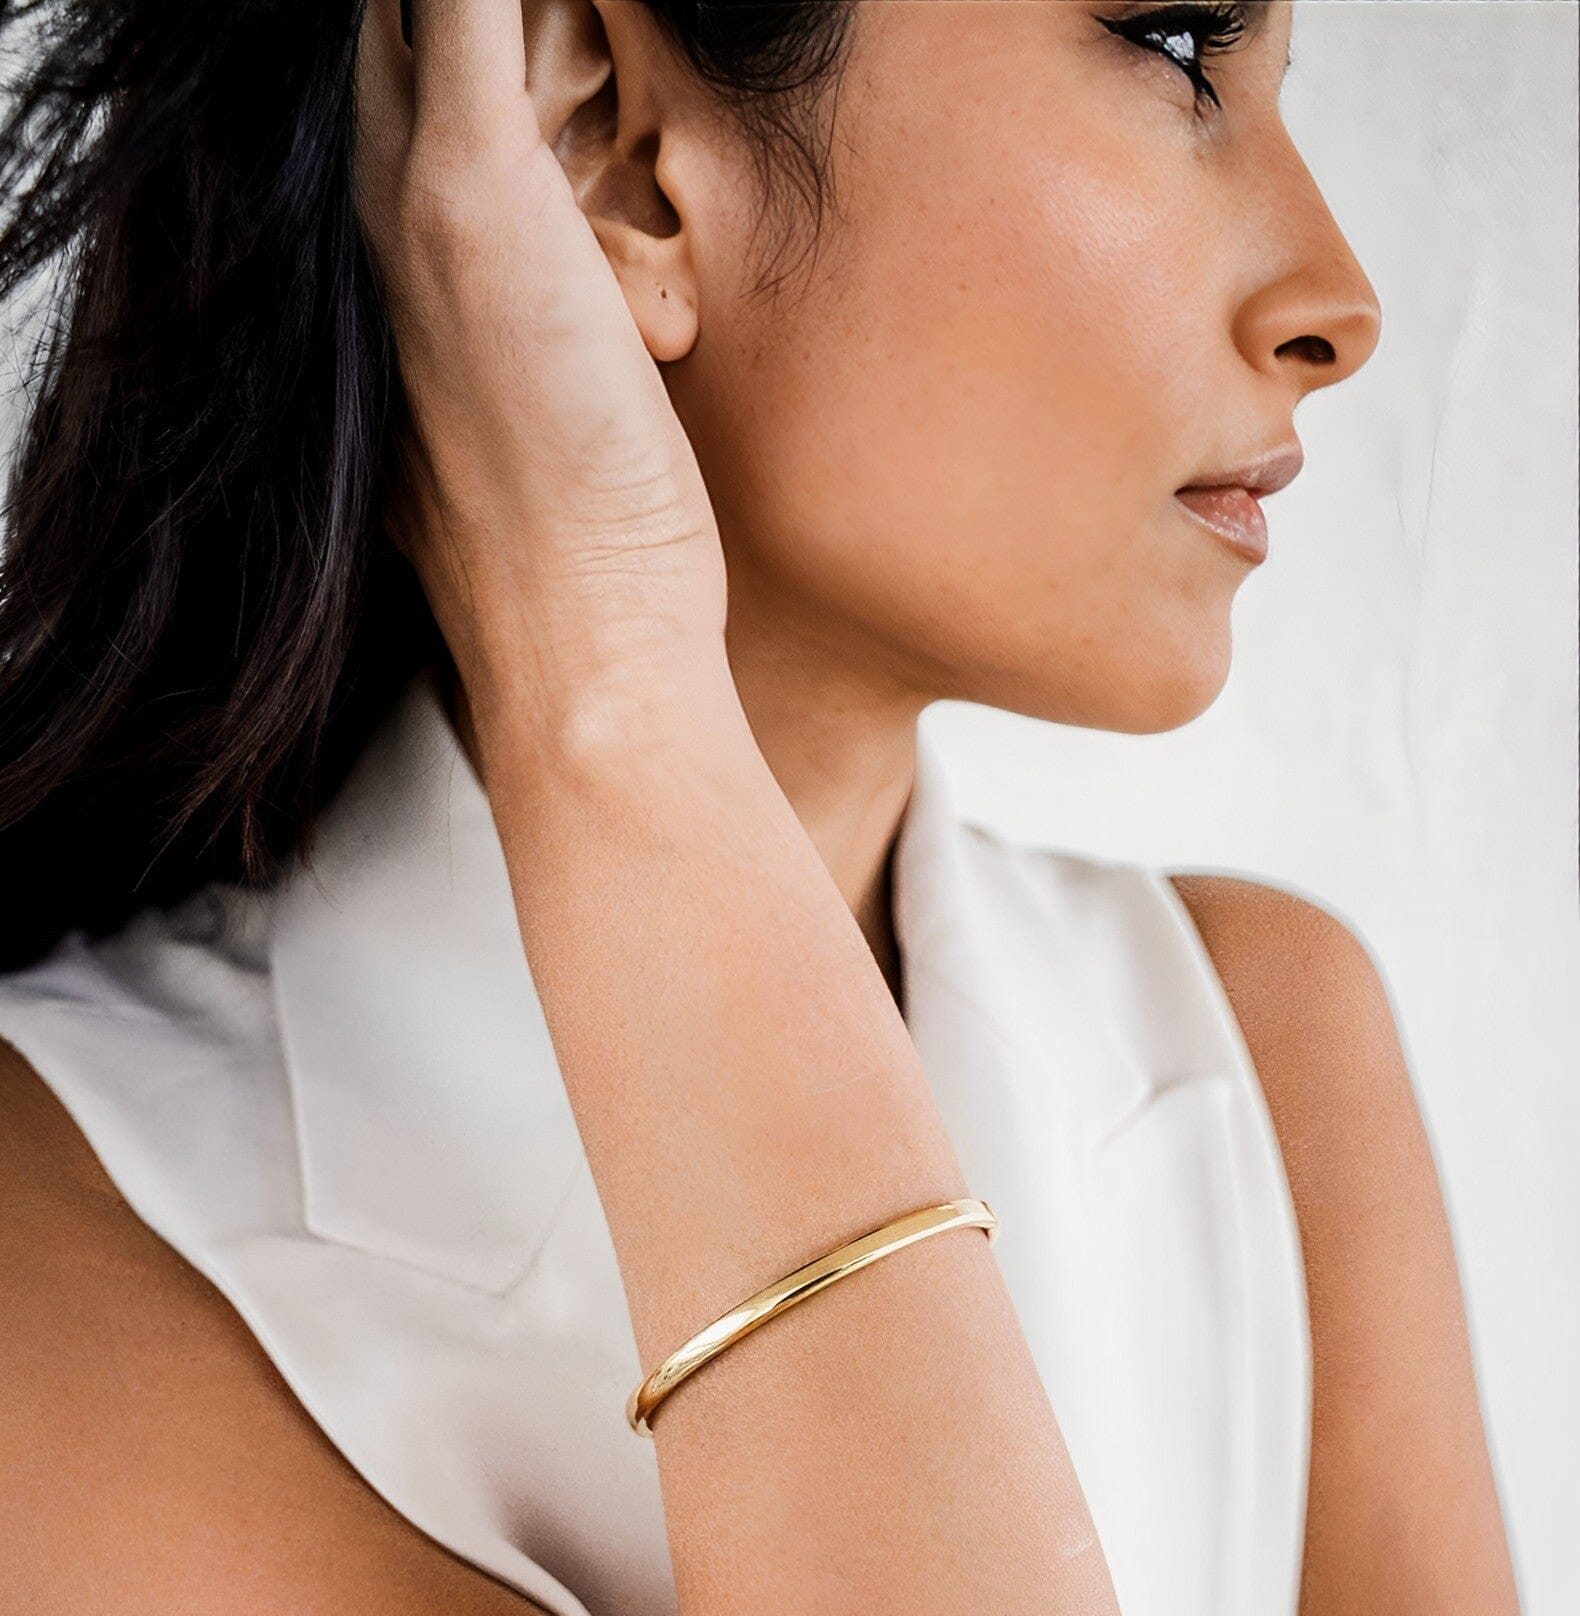 NADO BANGLE BRACELET braclet Yubama Jewelry Online Store - The Elegant Designs of Gold and Silver ! 